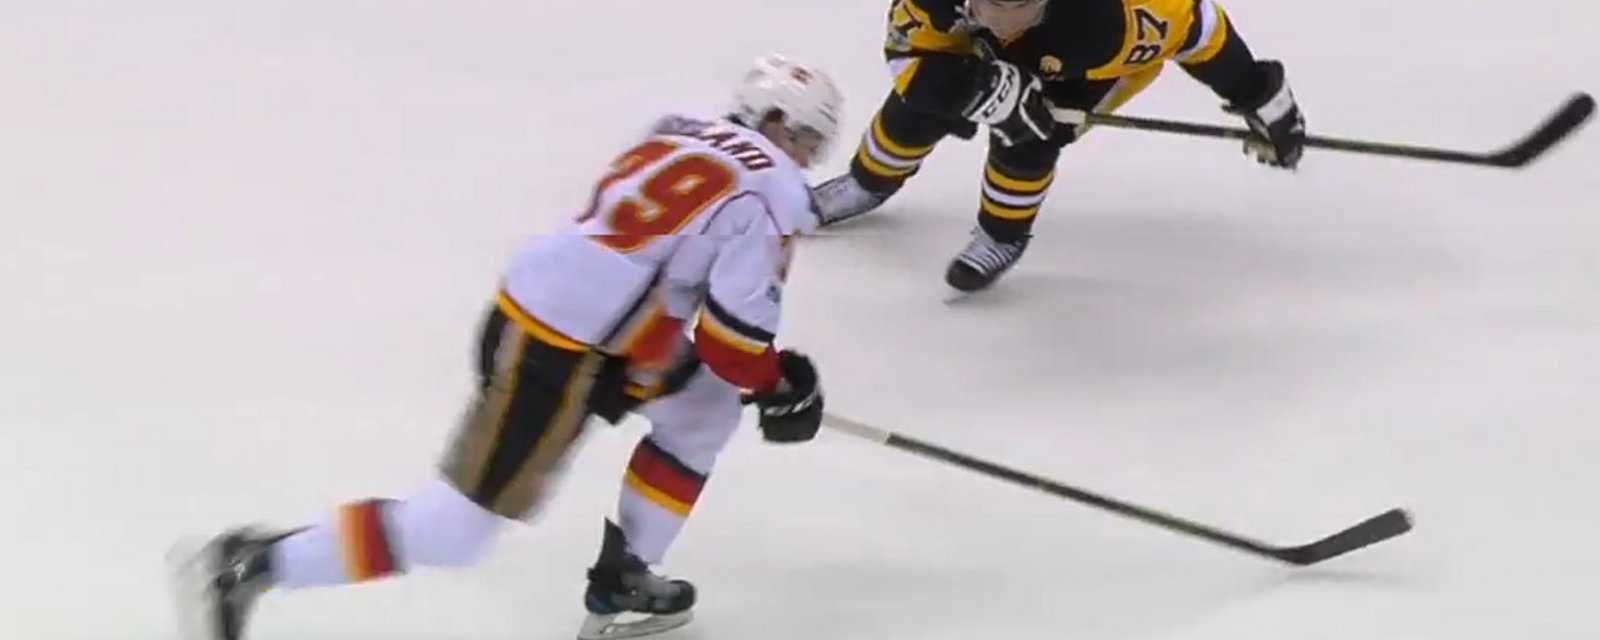 Brutal turnover from Crosby gives the Flames an early lead.